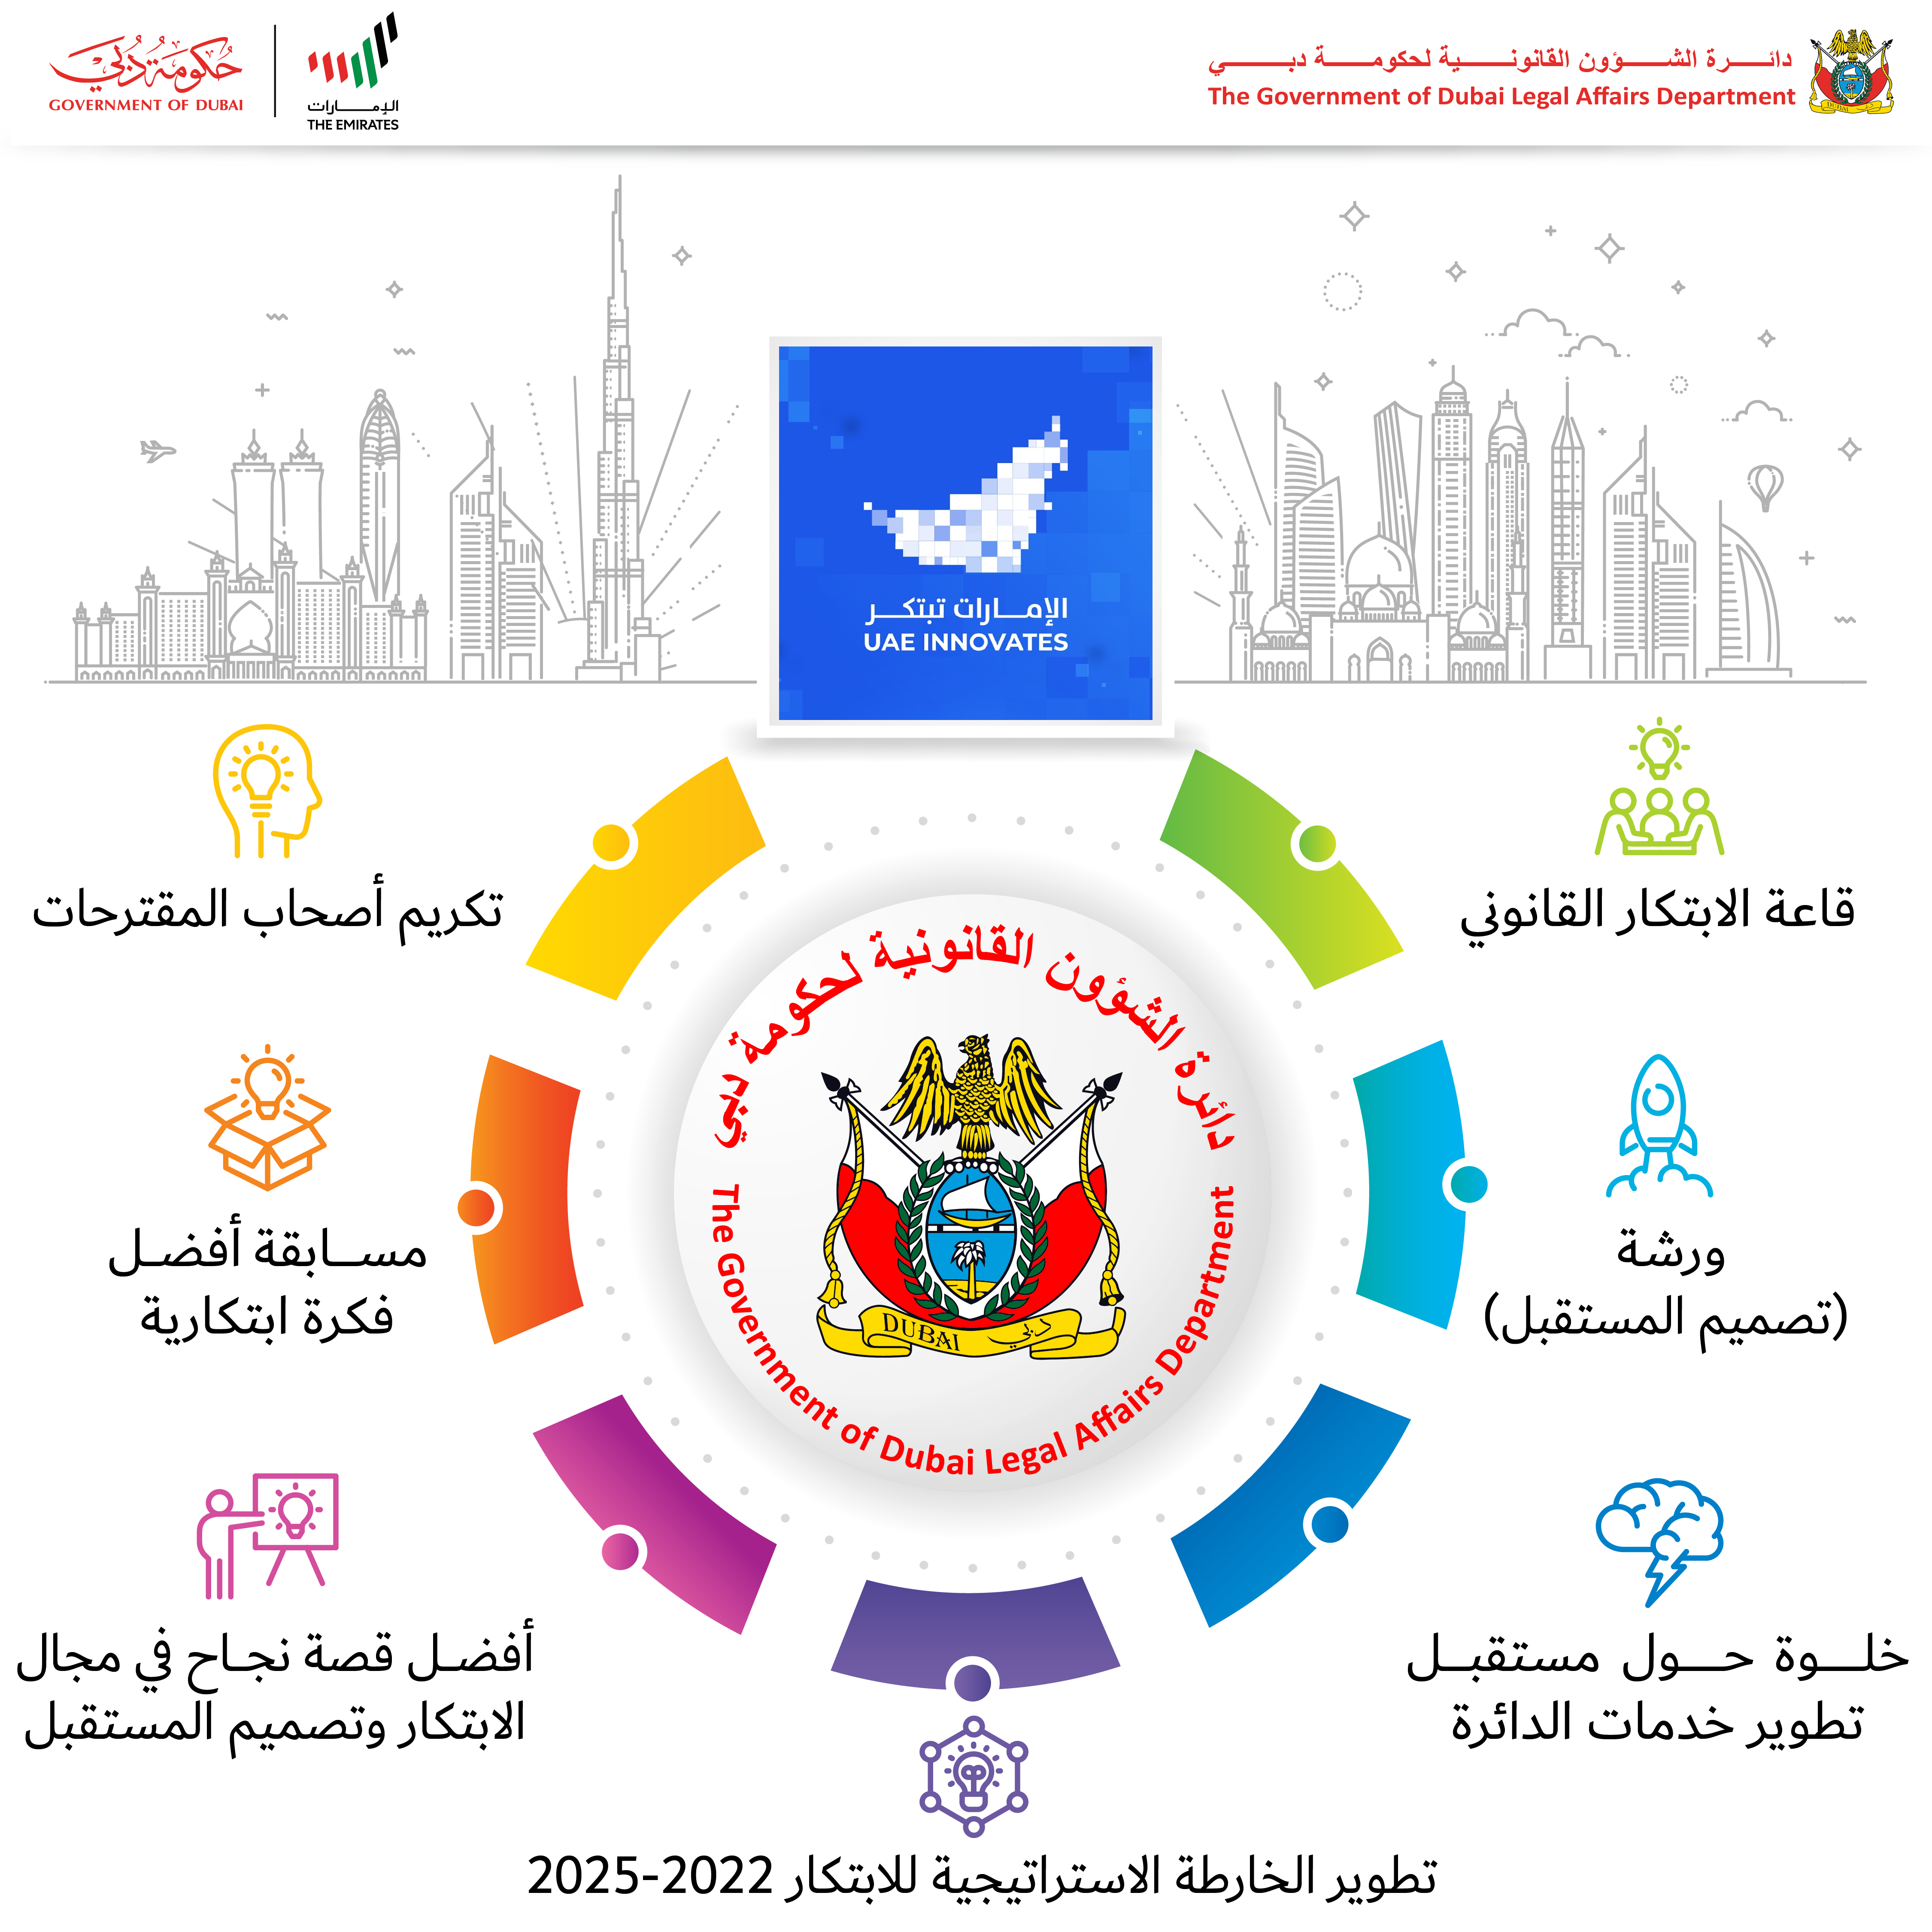 The Government of Dubai Legal Affairs Department Participates in Various Activities During the UAE Innovation Month